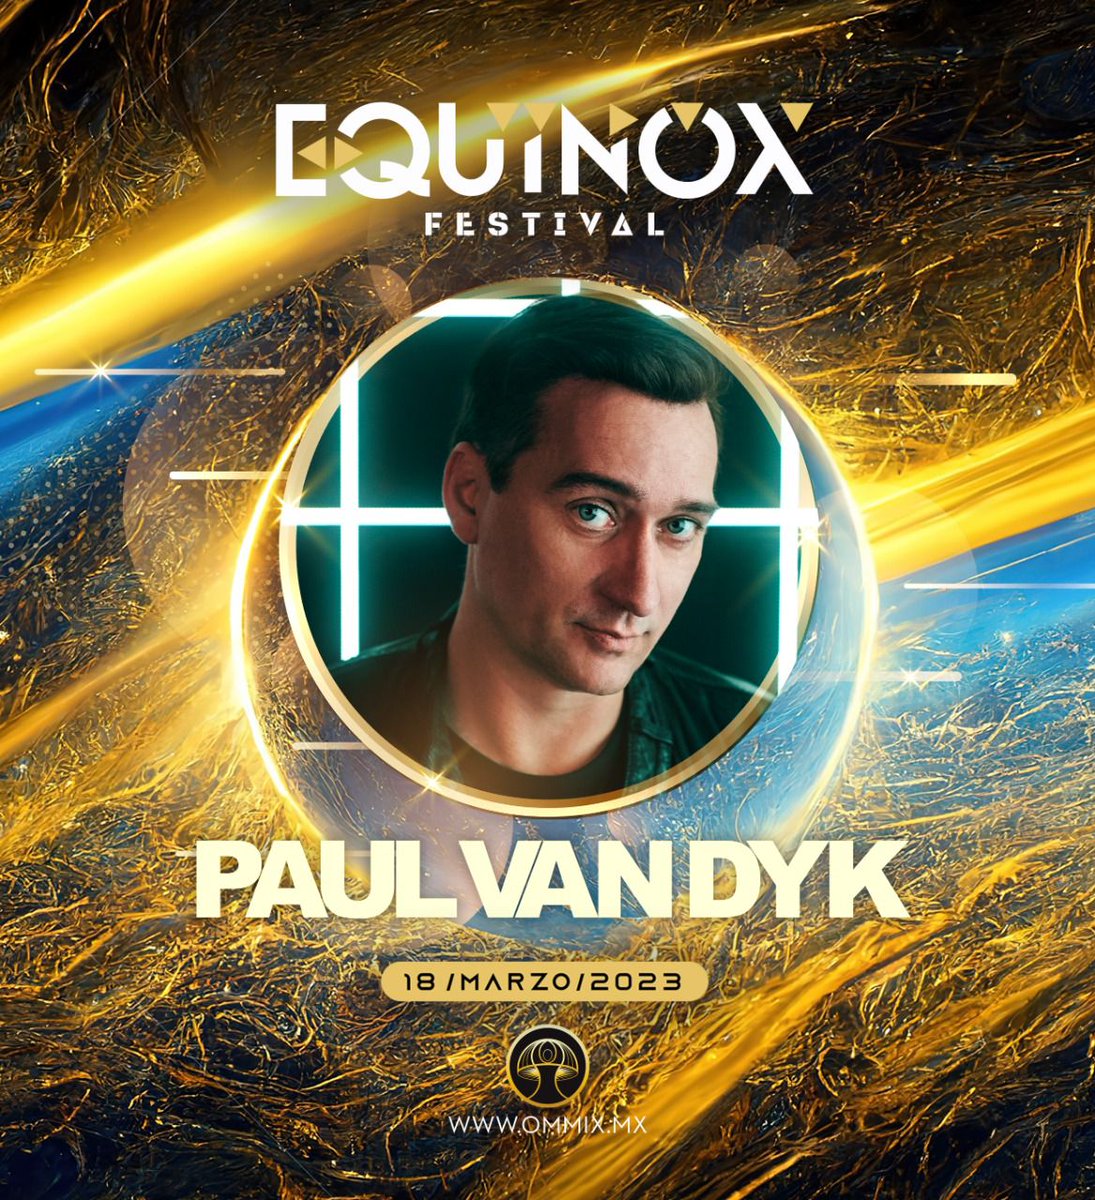 MEXICO 🇲🇽 I look forward to headline Equinox Festival in Teotihuacán March 18 2023! equinoxfest2023.ommix.mx #ommixmx #equinoxfestival #openairparty #uniquetalentmx